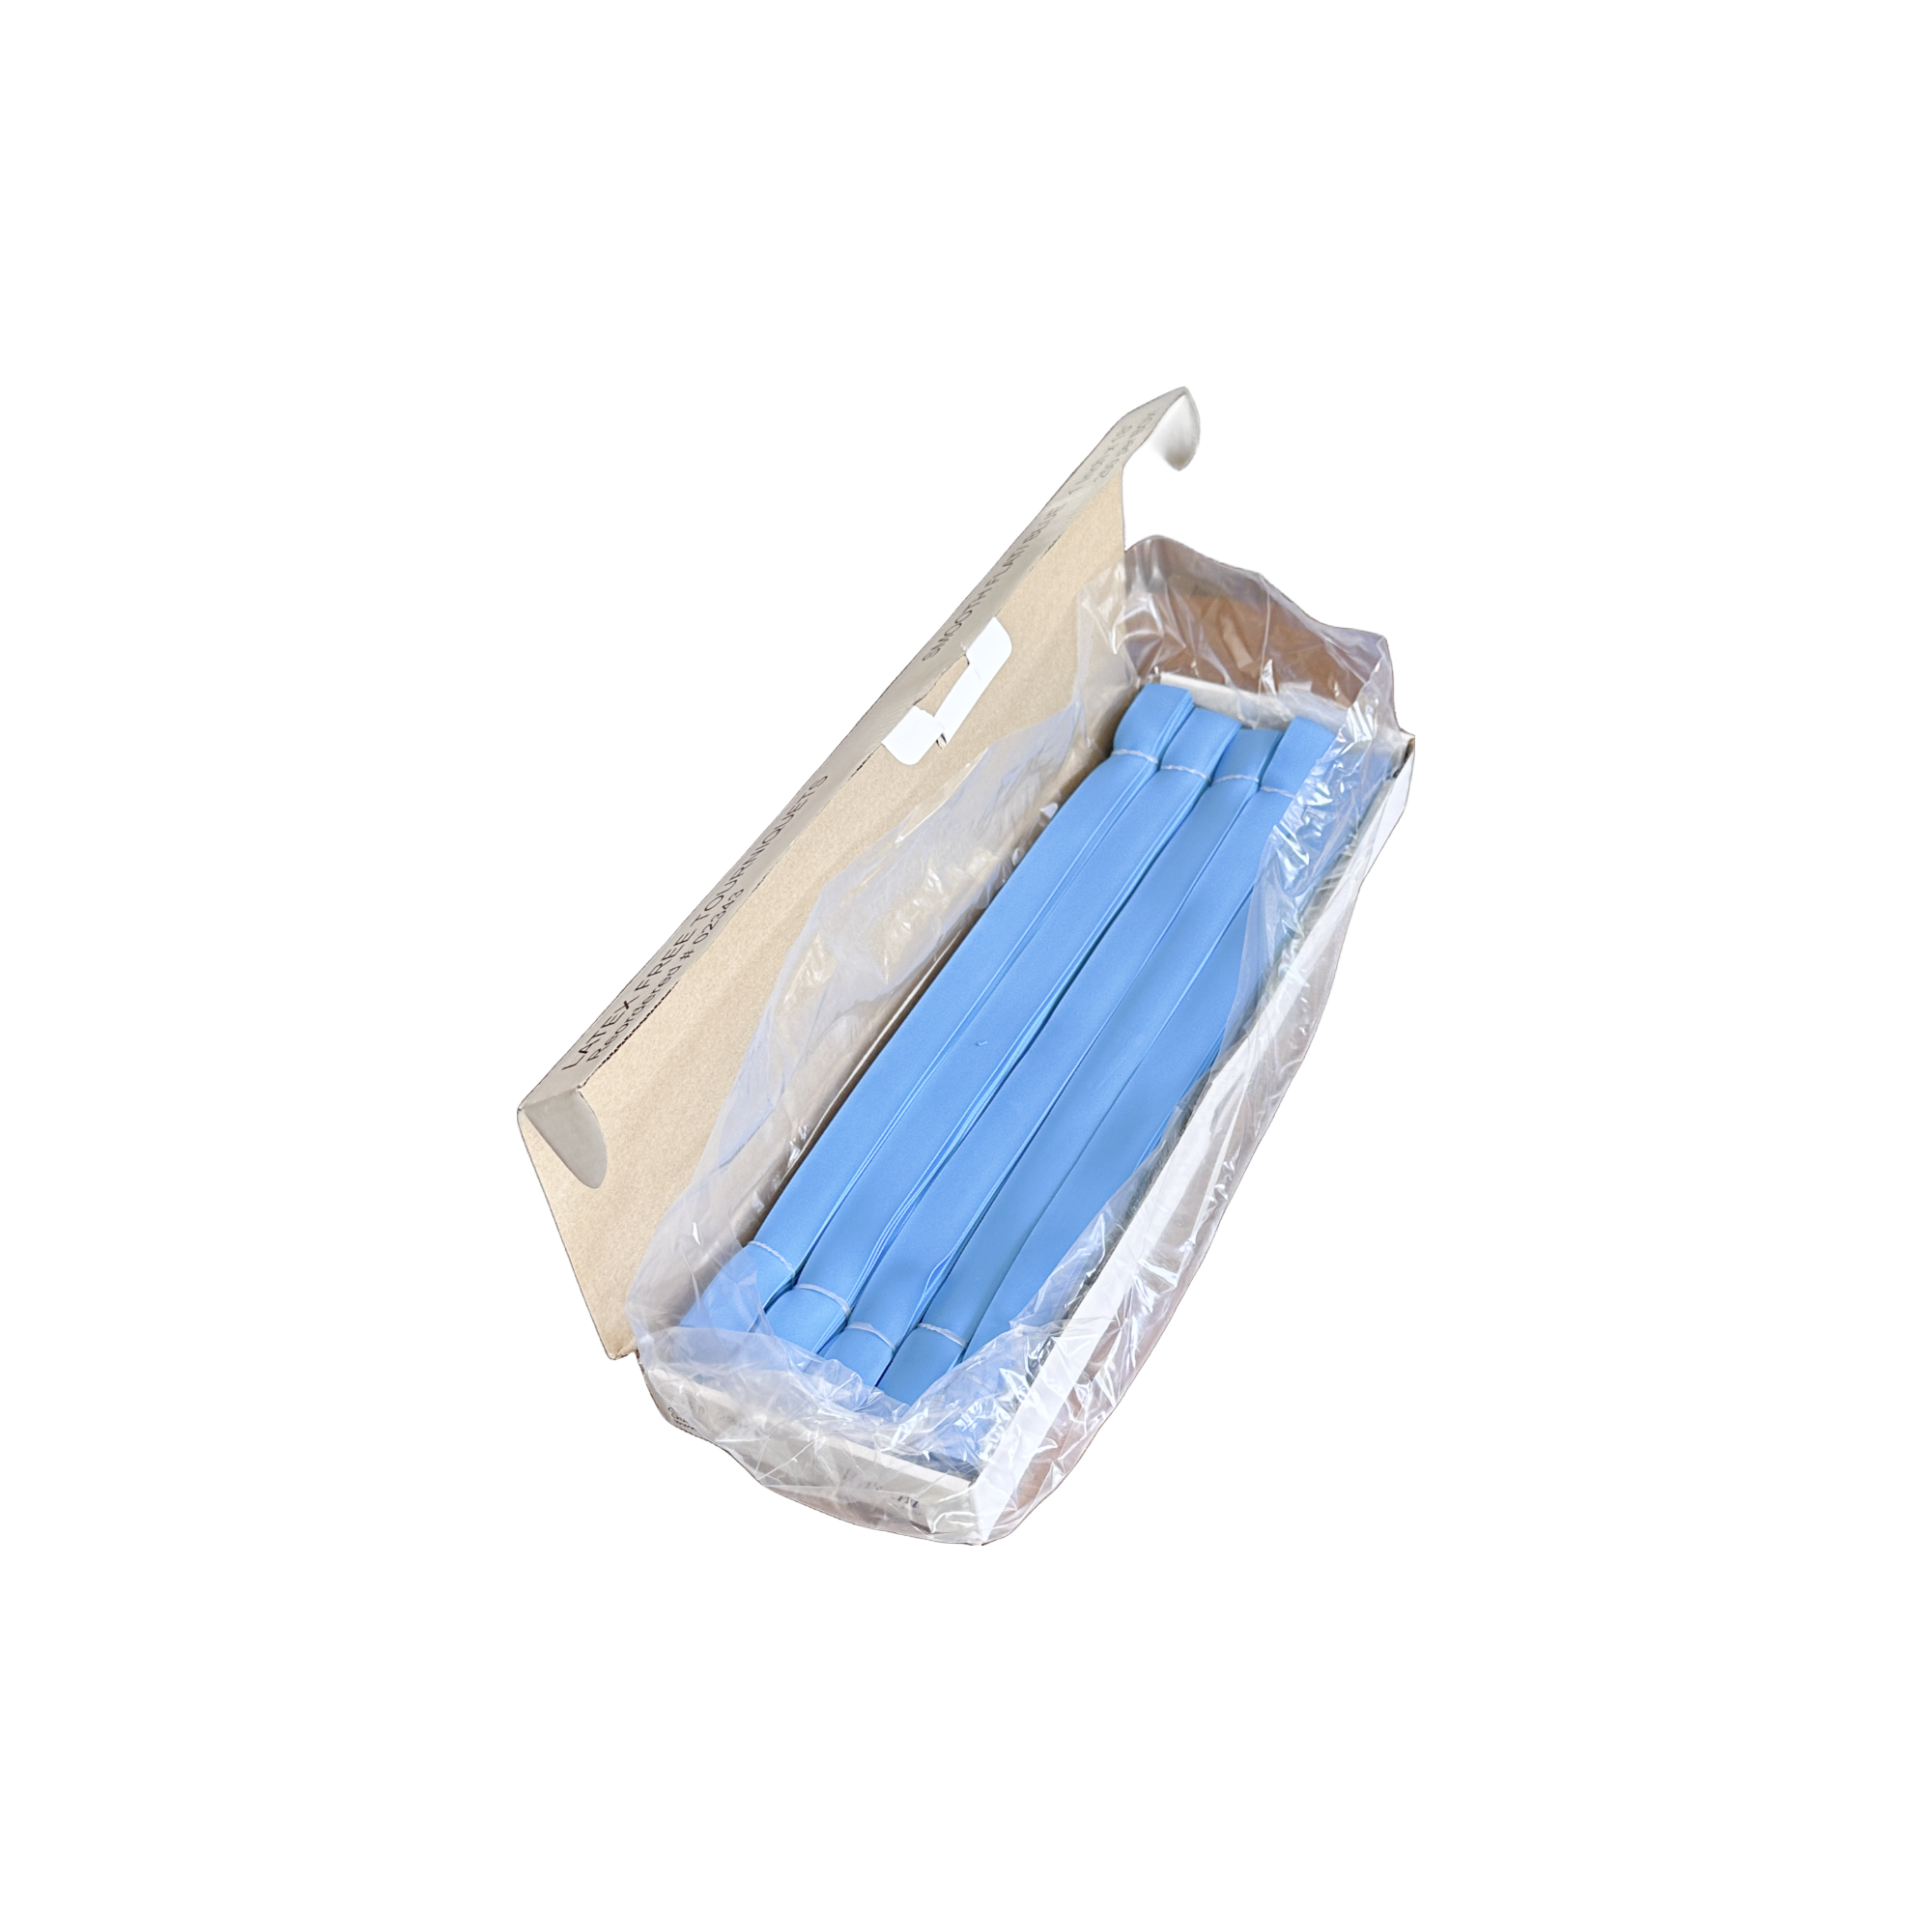 Blue Disposable Non-Latex Tourniquet 250/bx<p><a href="images/green.pngtitle="In Stock & Ready for immediate shipping."></a><img src="images/green.png" alt="In Stock & Ready for immediate shipping." title="In Stock & Ready for immediate shipping." width="227" height="50" /></p>